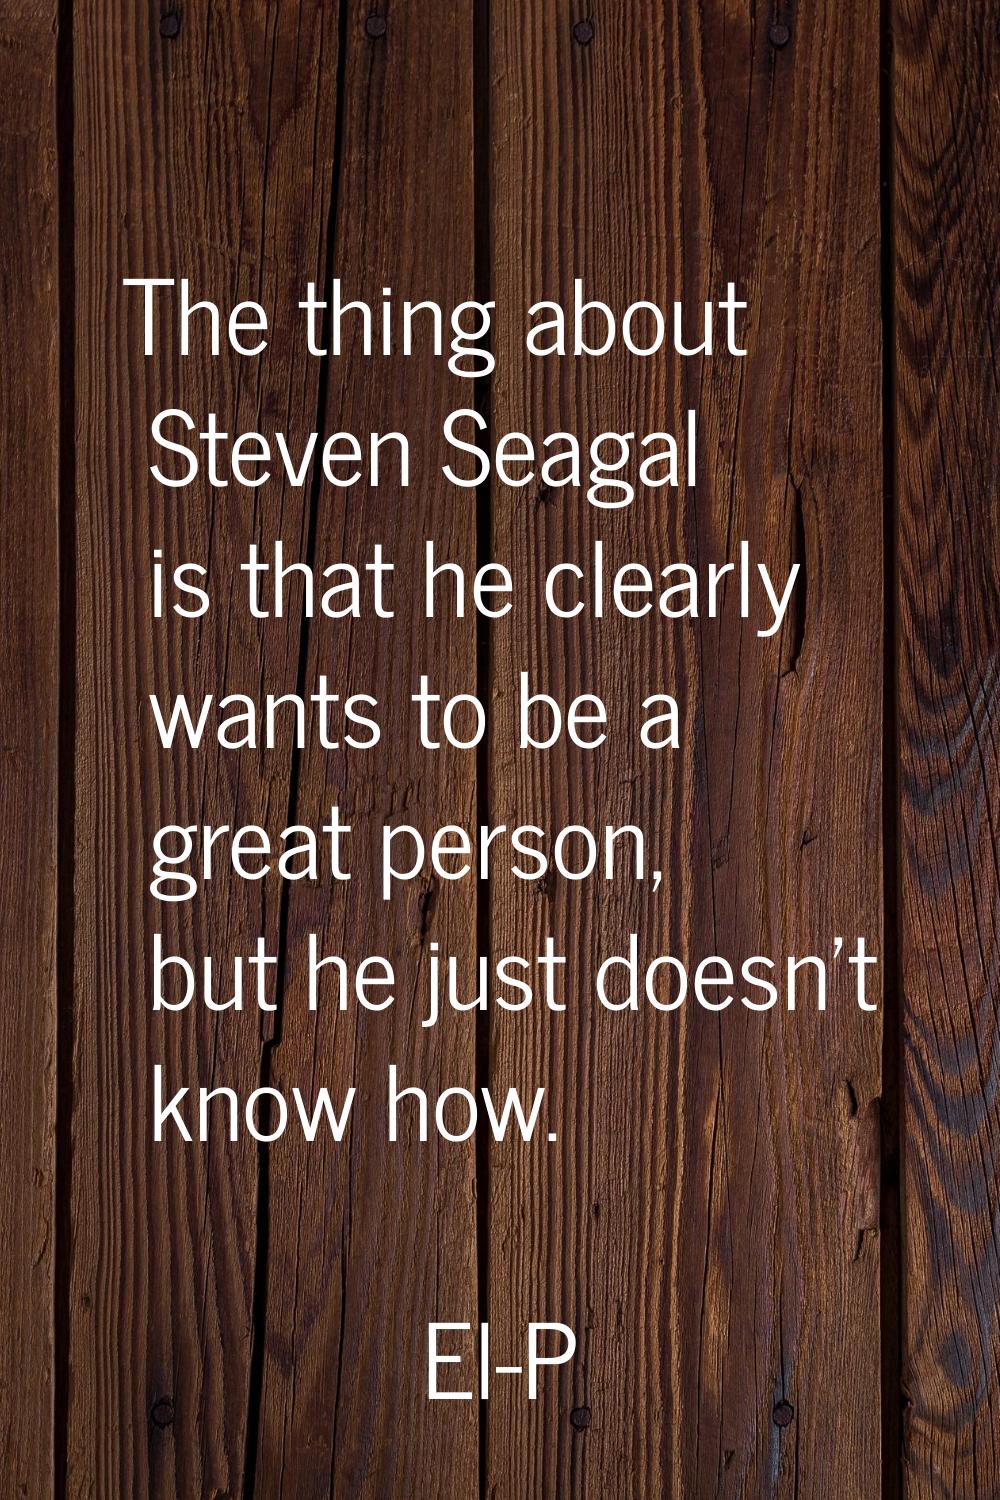 The thing about Steven Seagal is that he clearly wants to be a great person, but he just doesn't kn